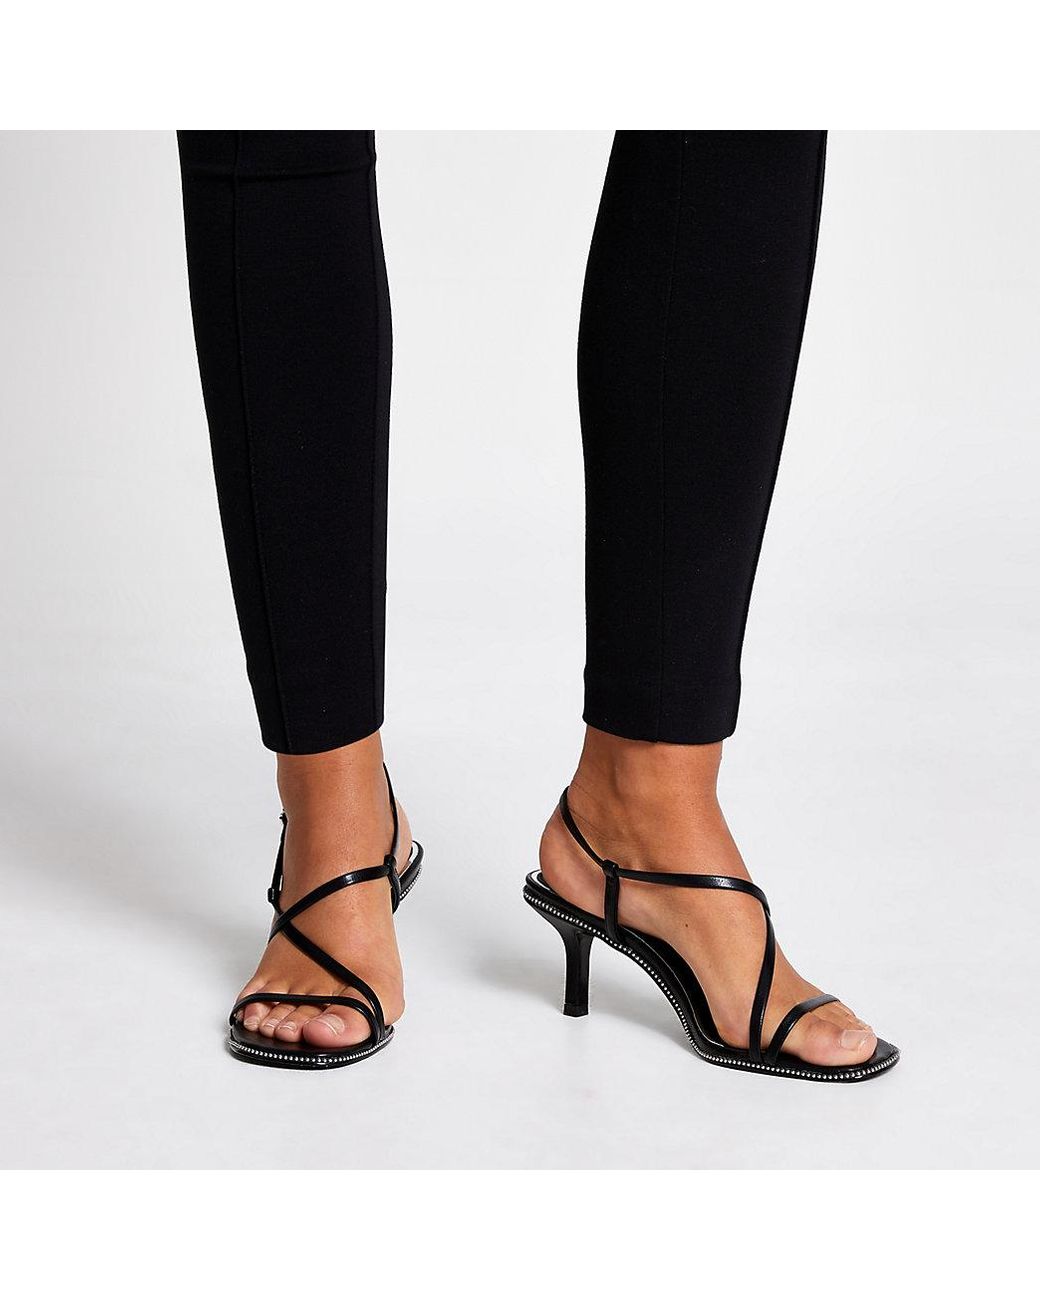 Buy Black Heeled Sandals for Women by FROH FEET Online | Ajio.com